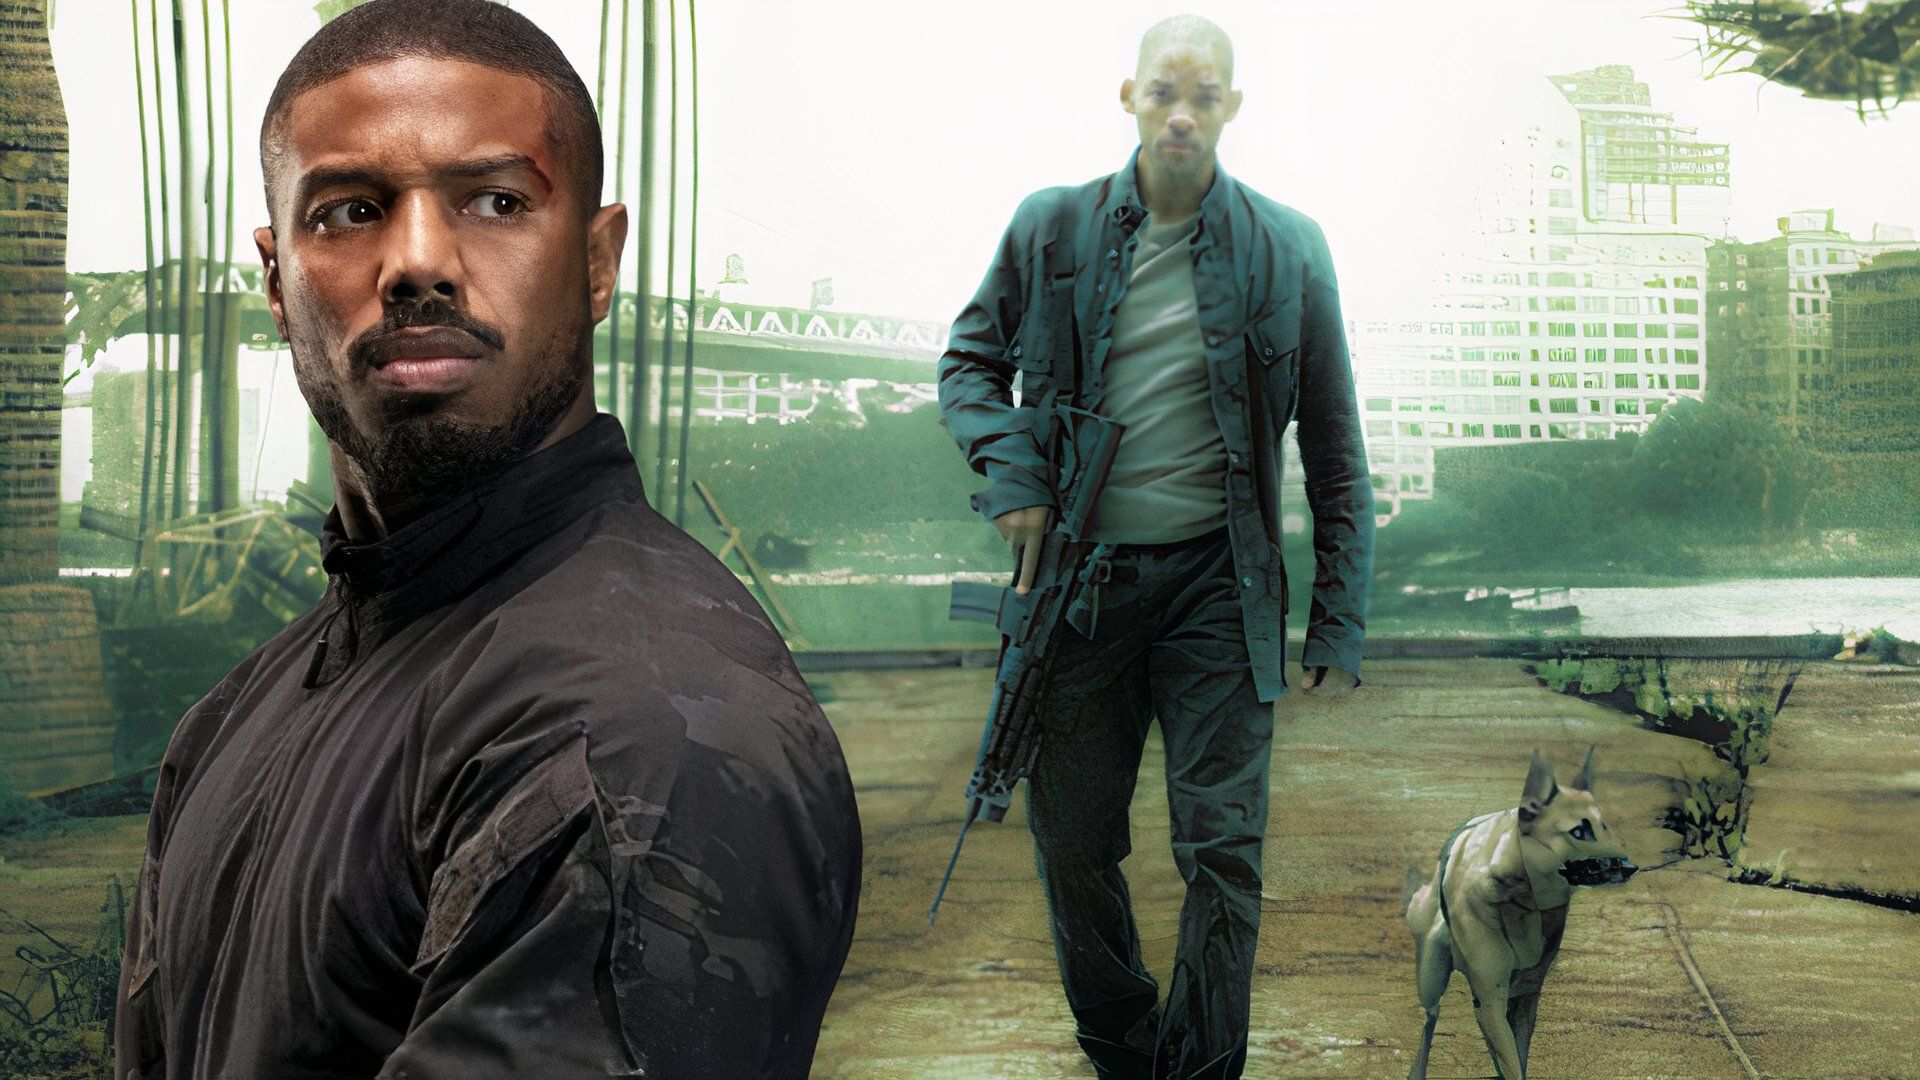 Michael B. Jordan and Will Smith in I Am Legend.